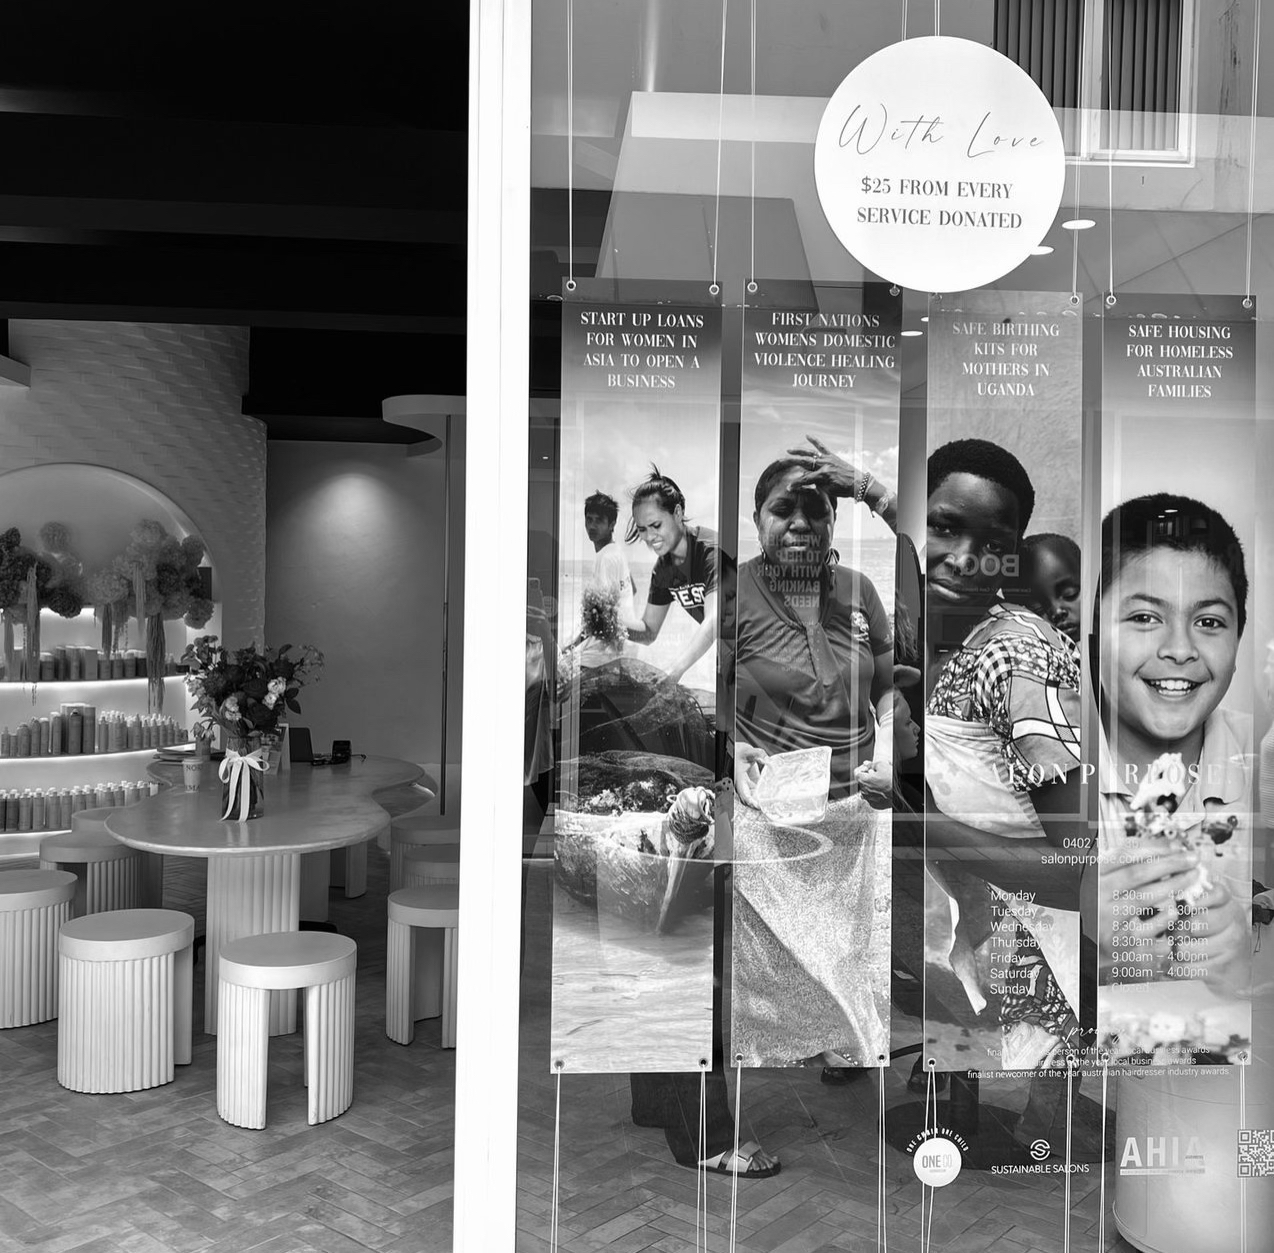 Salon Purpose 'With Love' Campaign window display in black and white